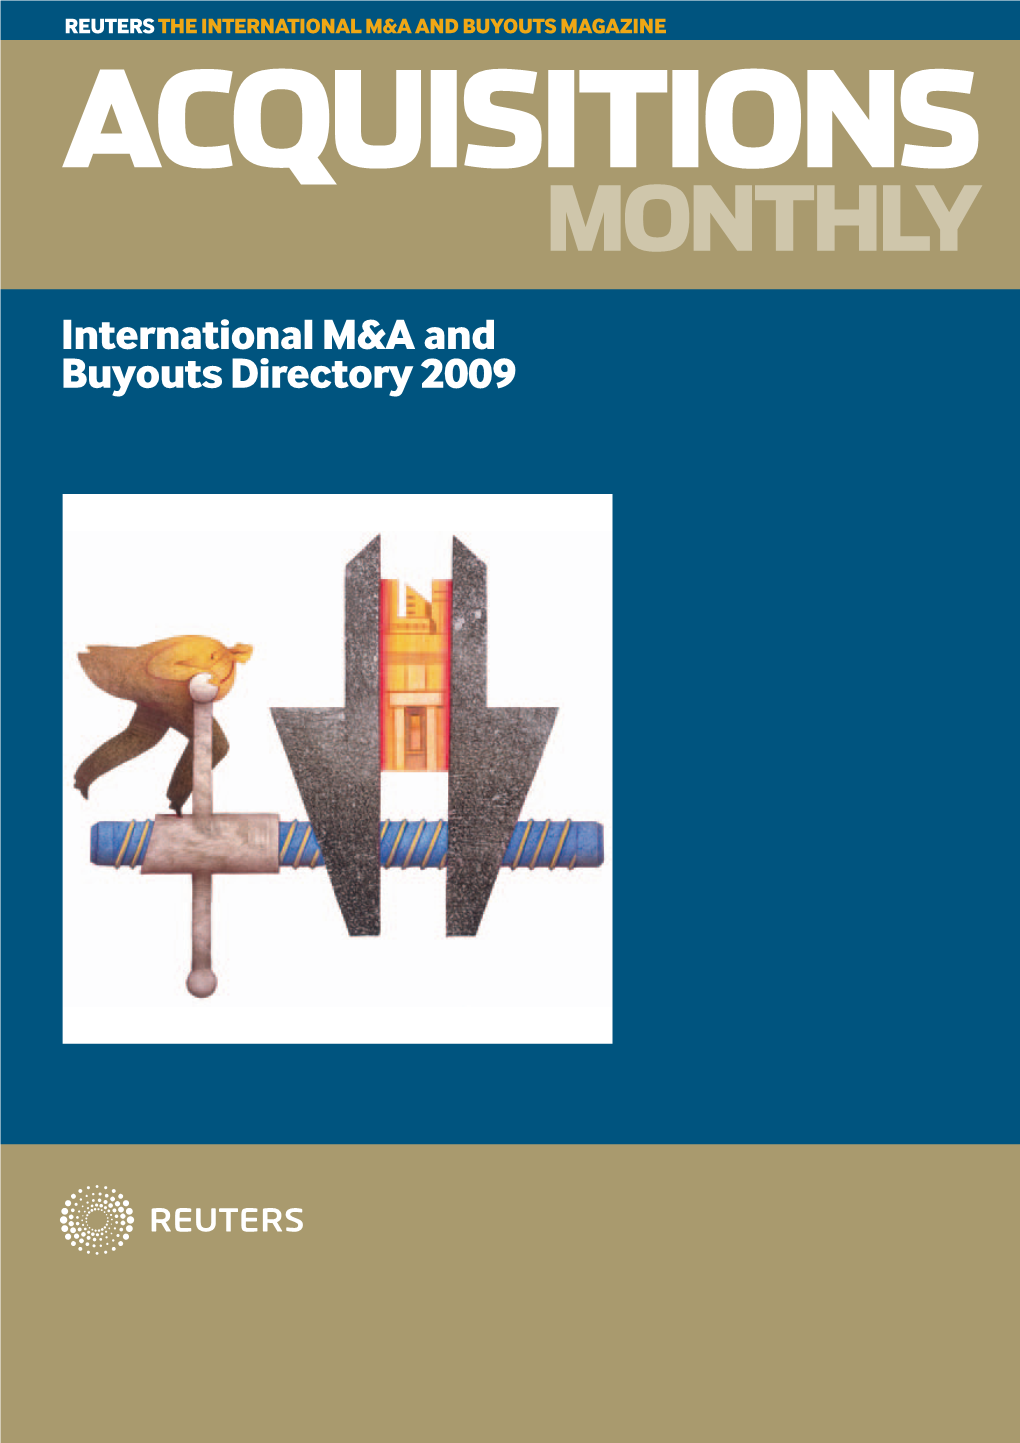 International M&A and Buyouts Directory 2009